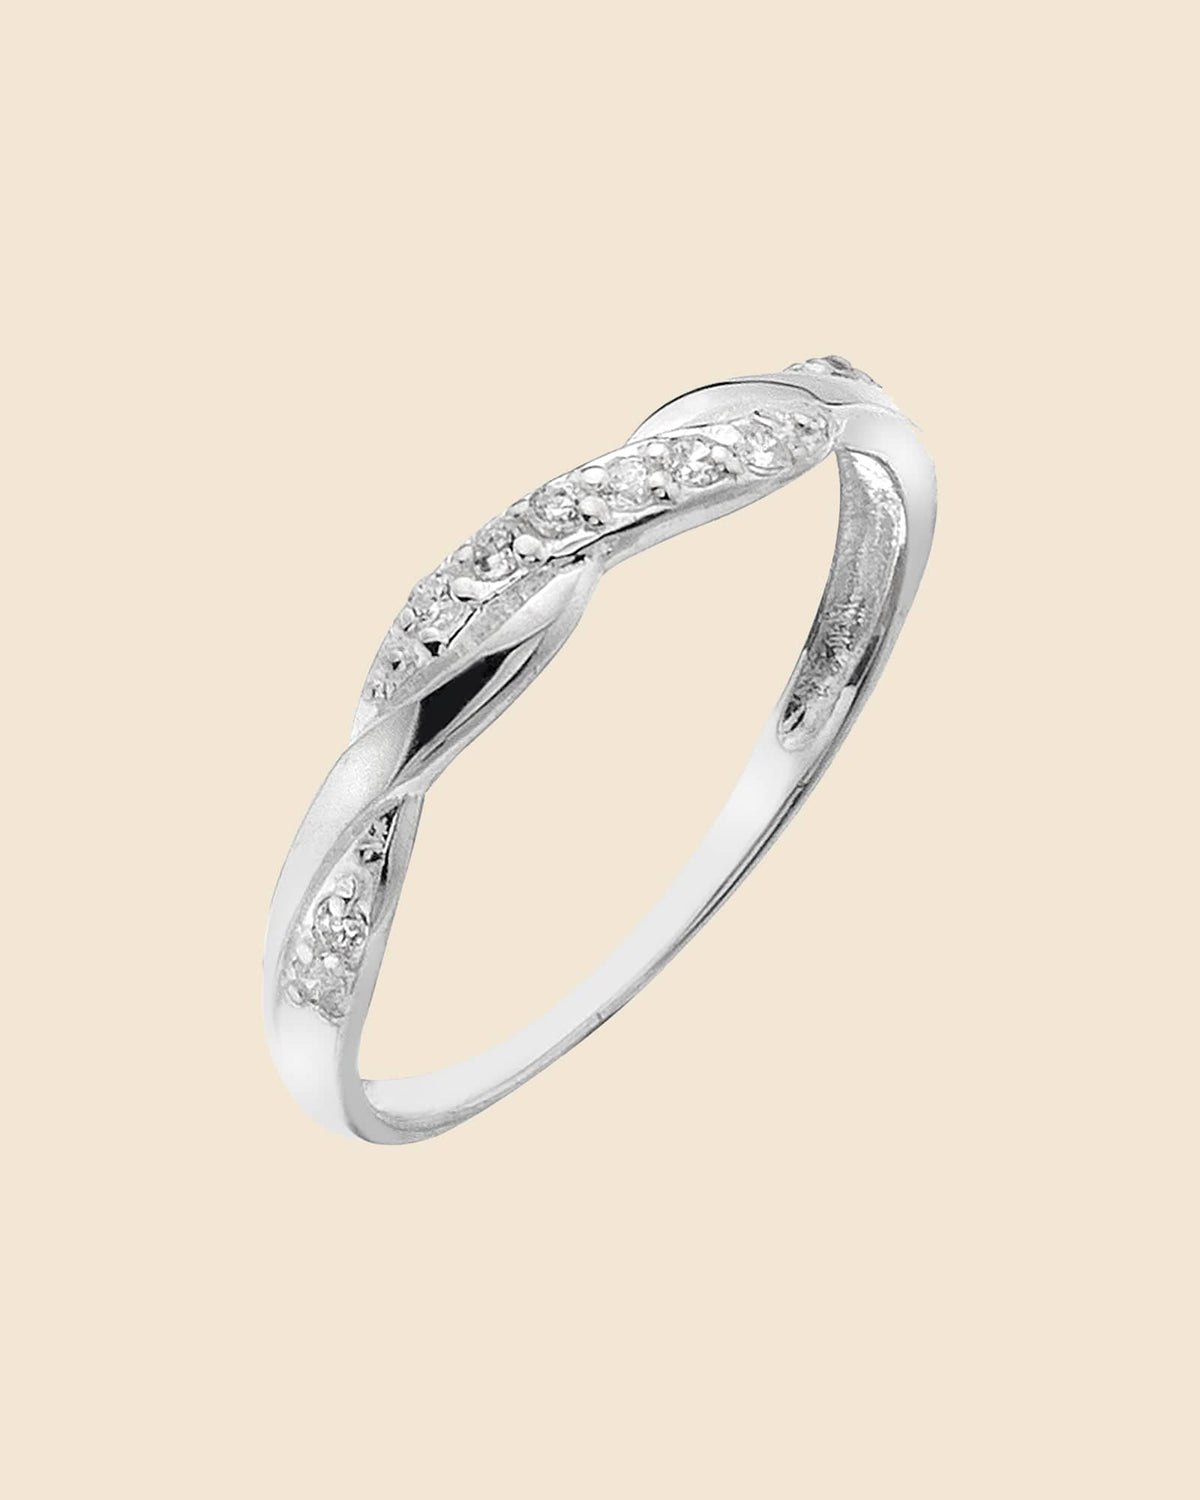 Sterling Silver and Cubic Zirconia Entwined Ring